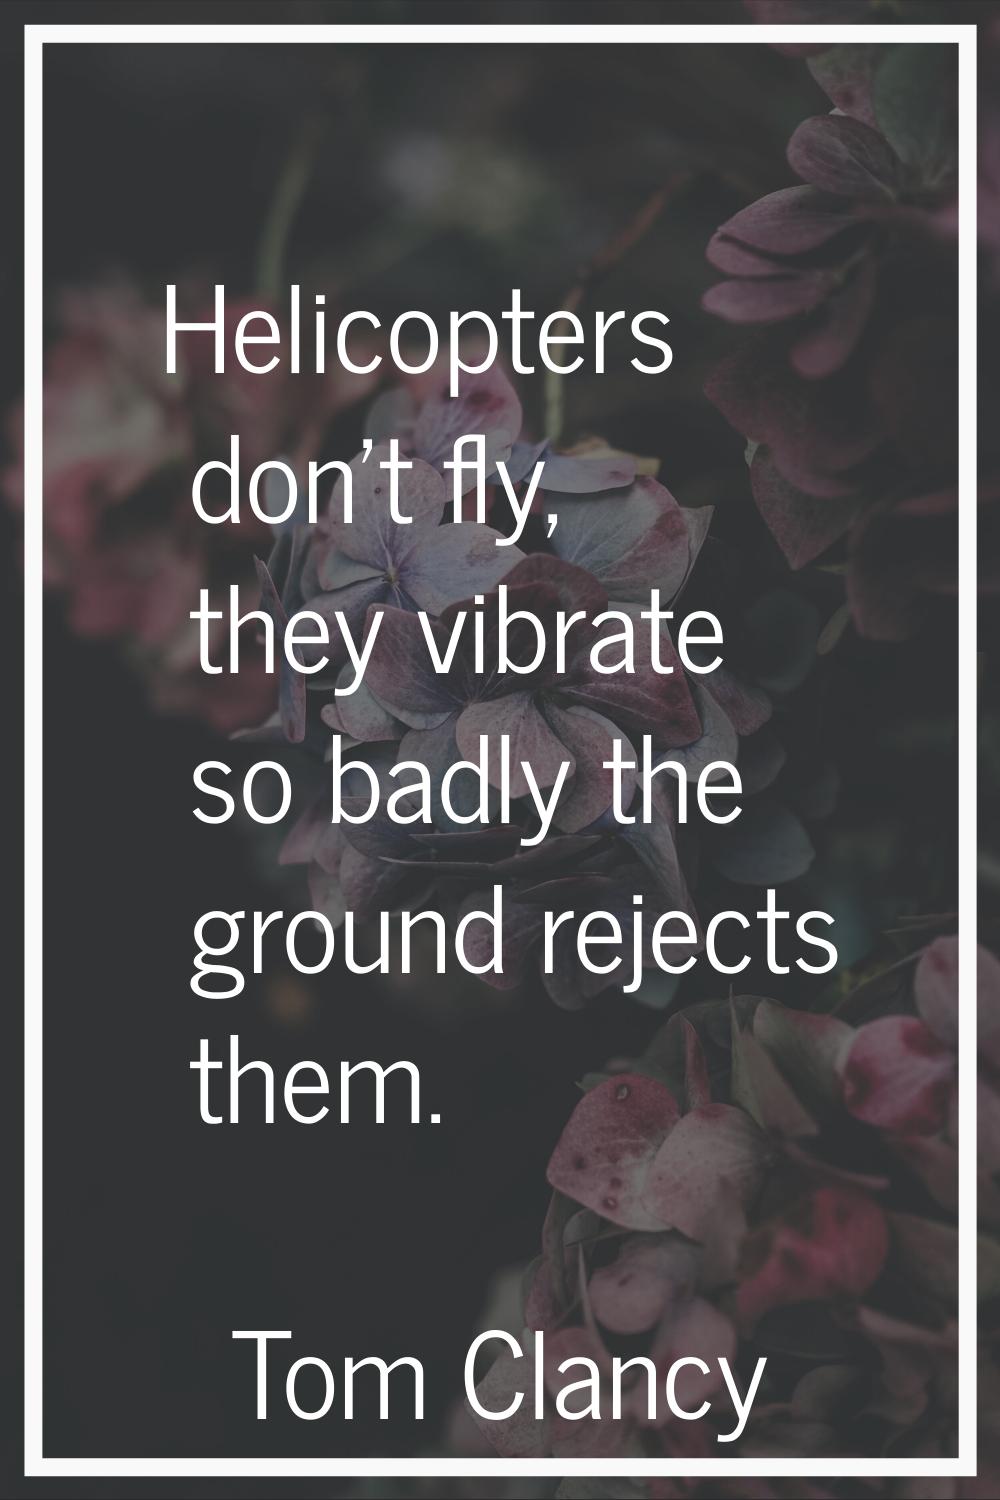 Helicopters don't fly, they vibrate so badly the ground rejects them.